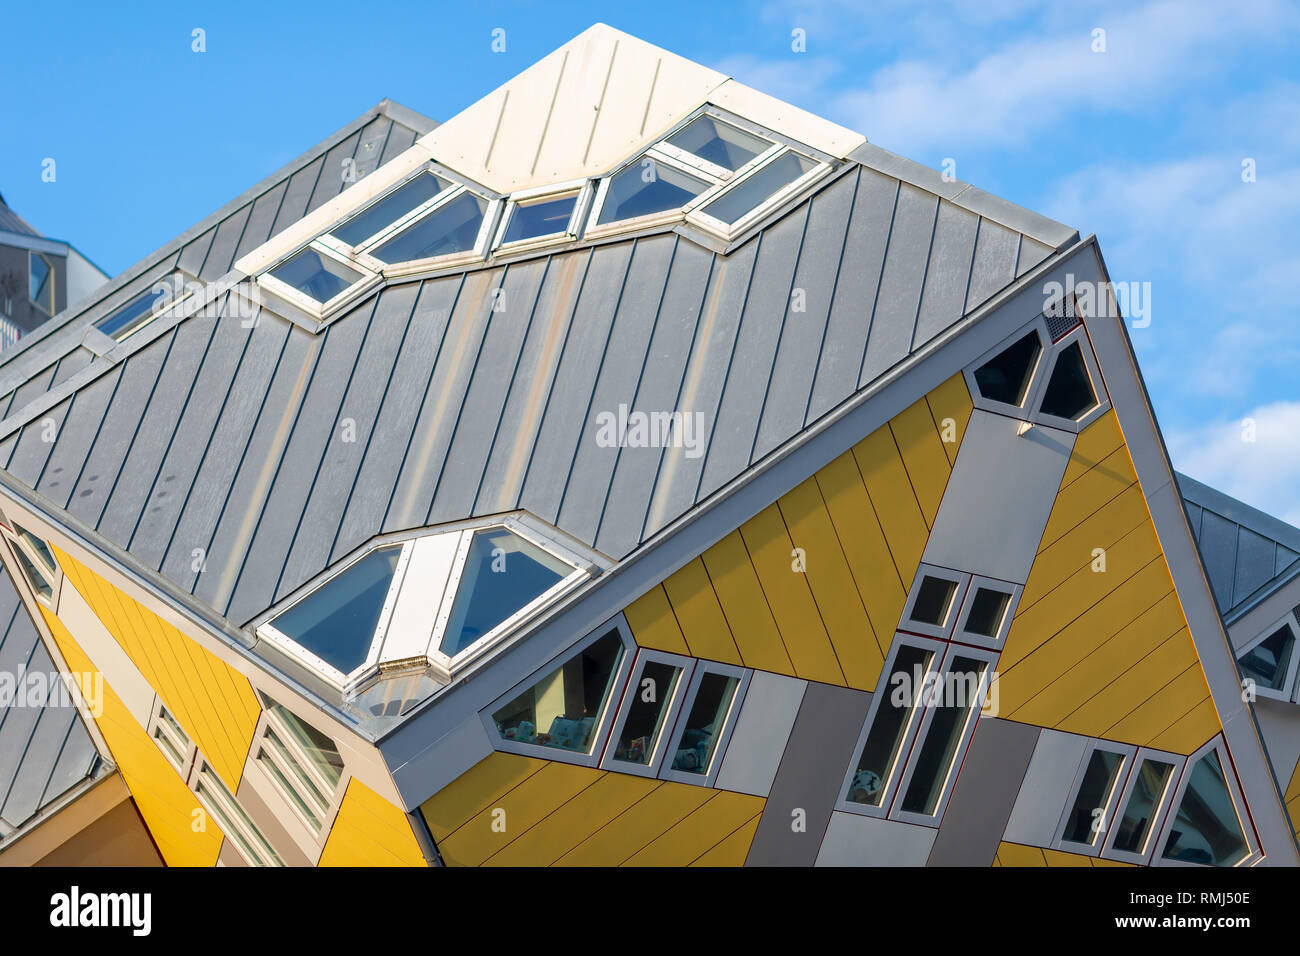 Detail view of one of the famous tilted cube houses in Rotterdam, The Netherlands, showing the roof and two sides of the cube Stock Photo